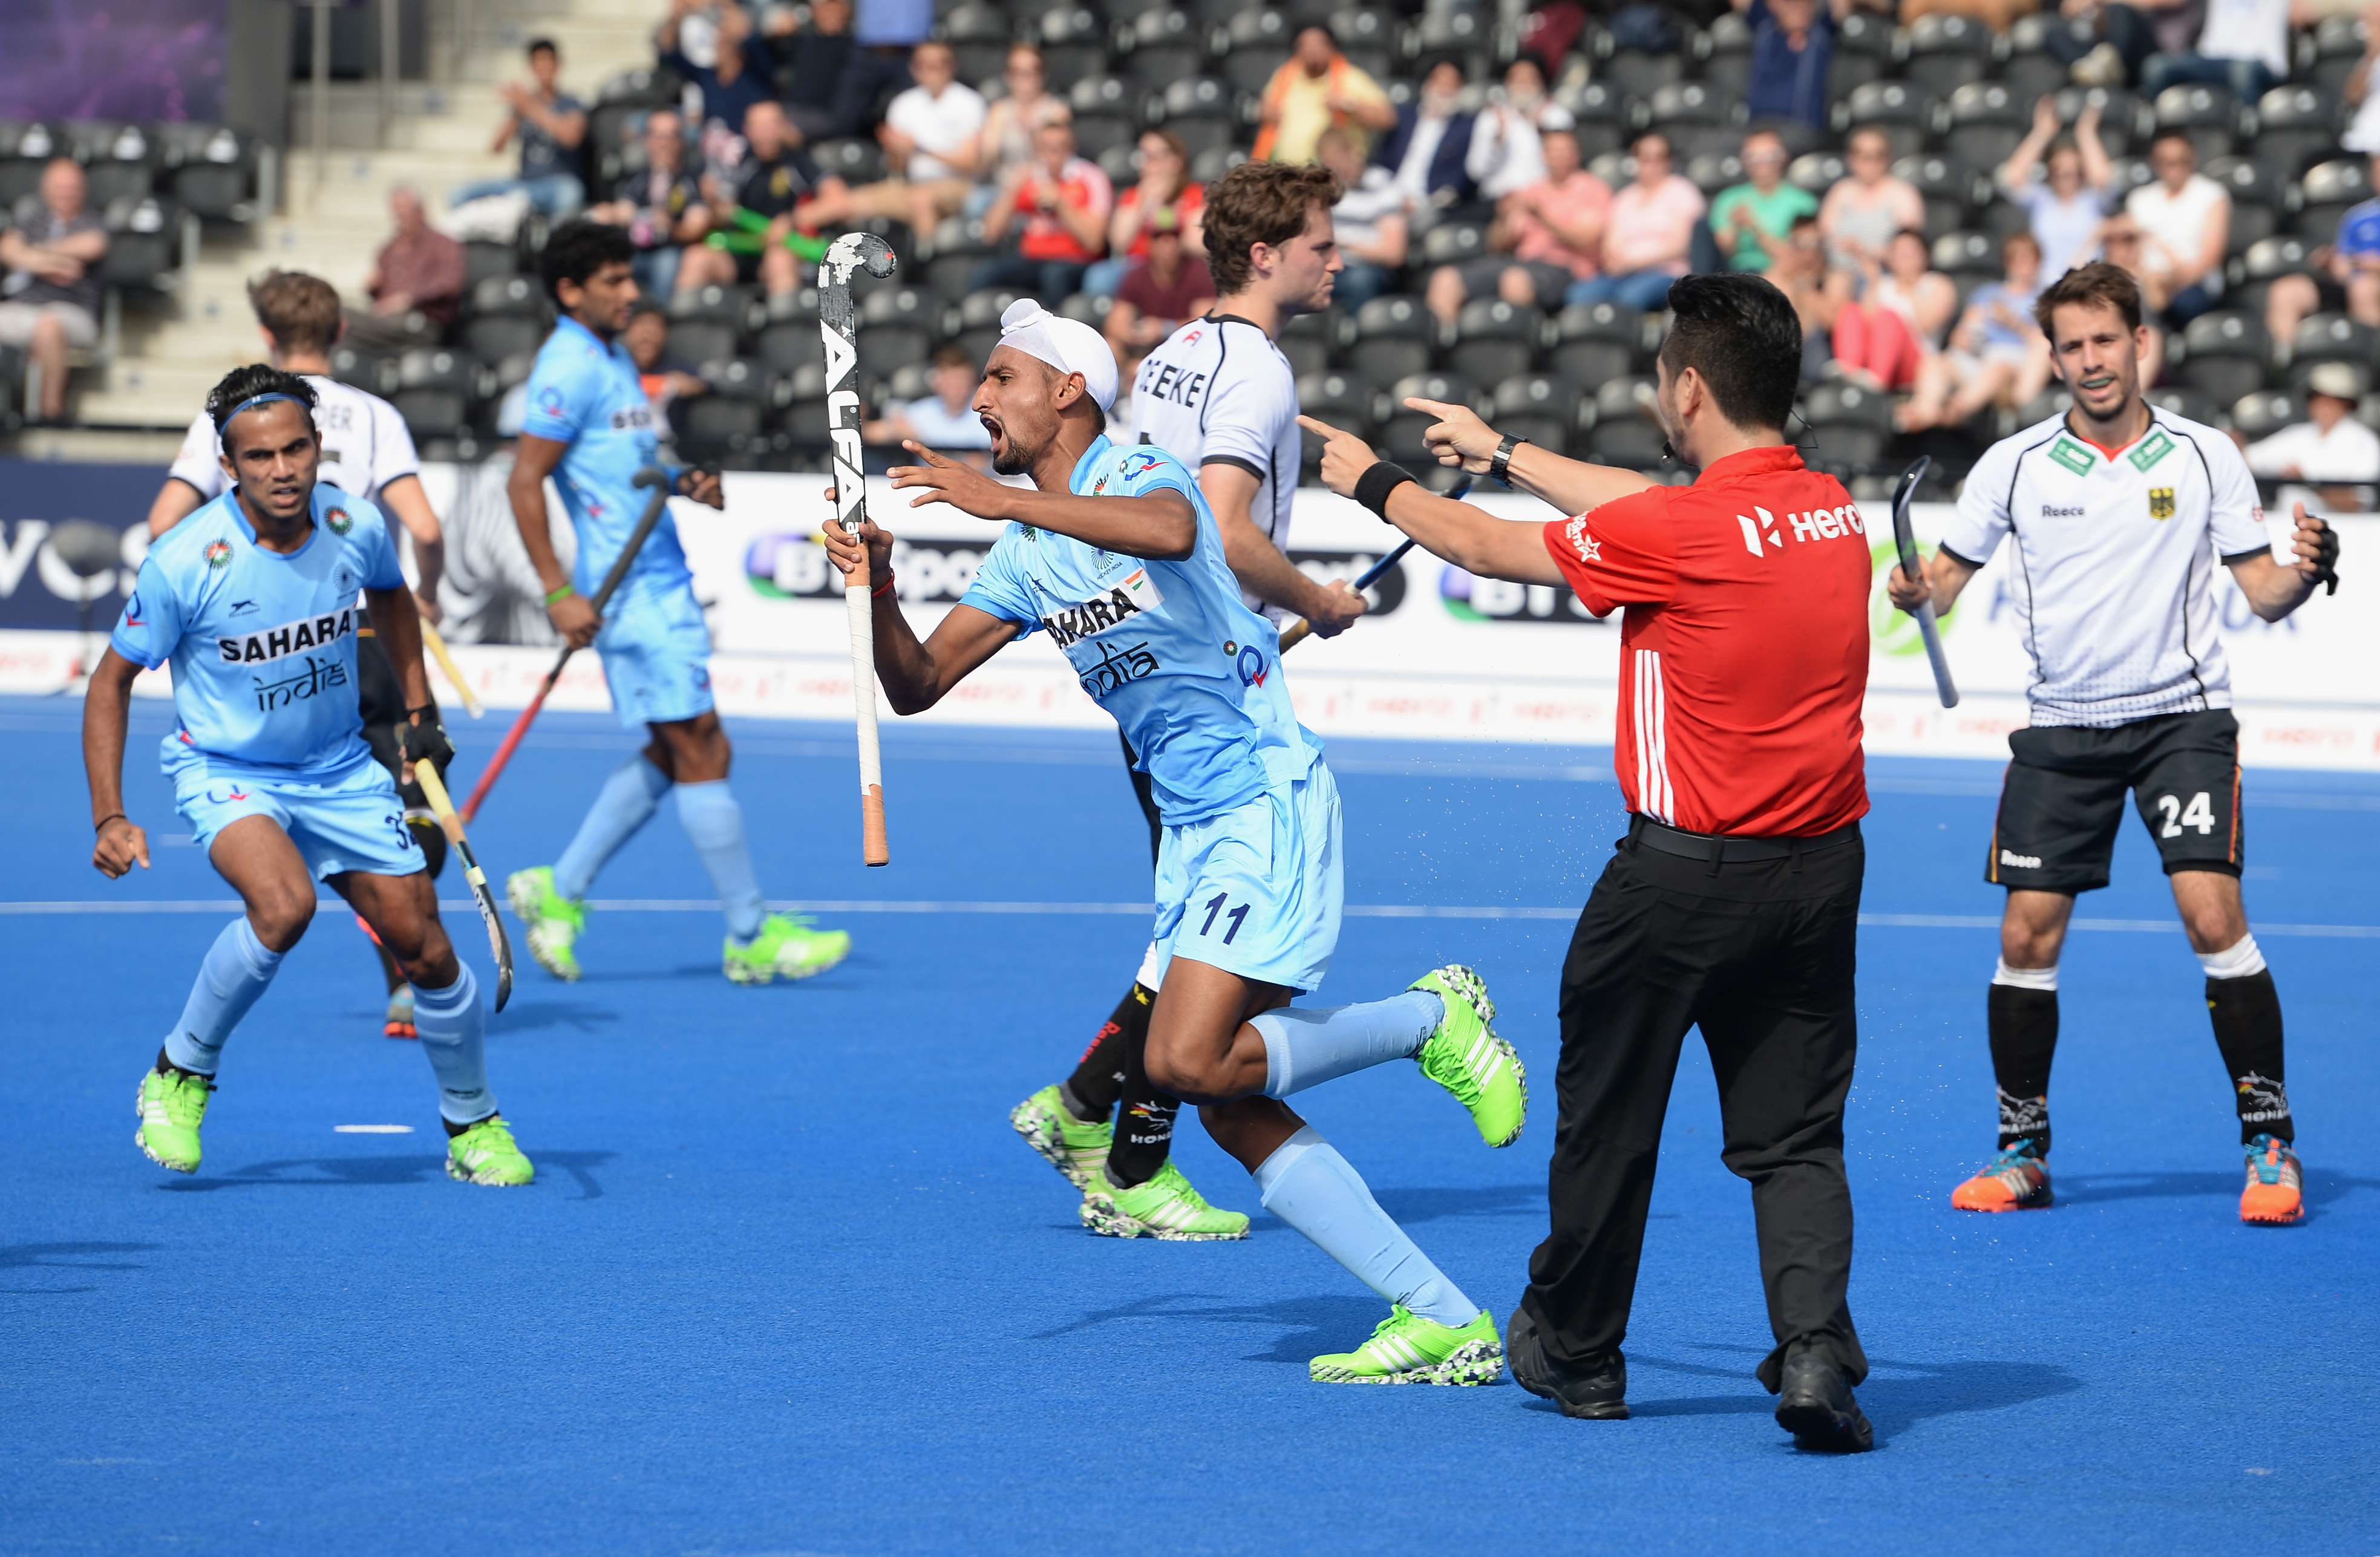 India to take on reigning Olympic hockey Champions Germany